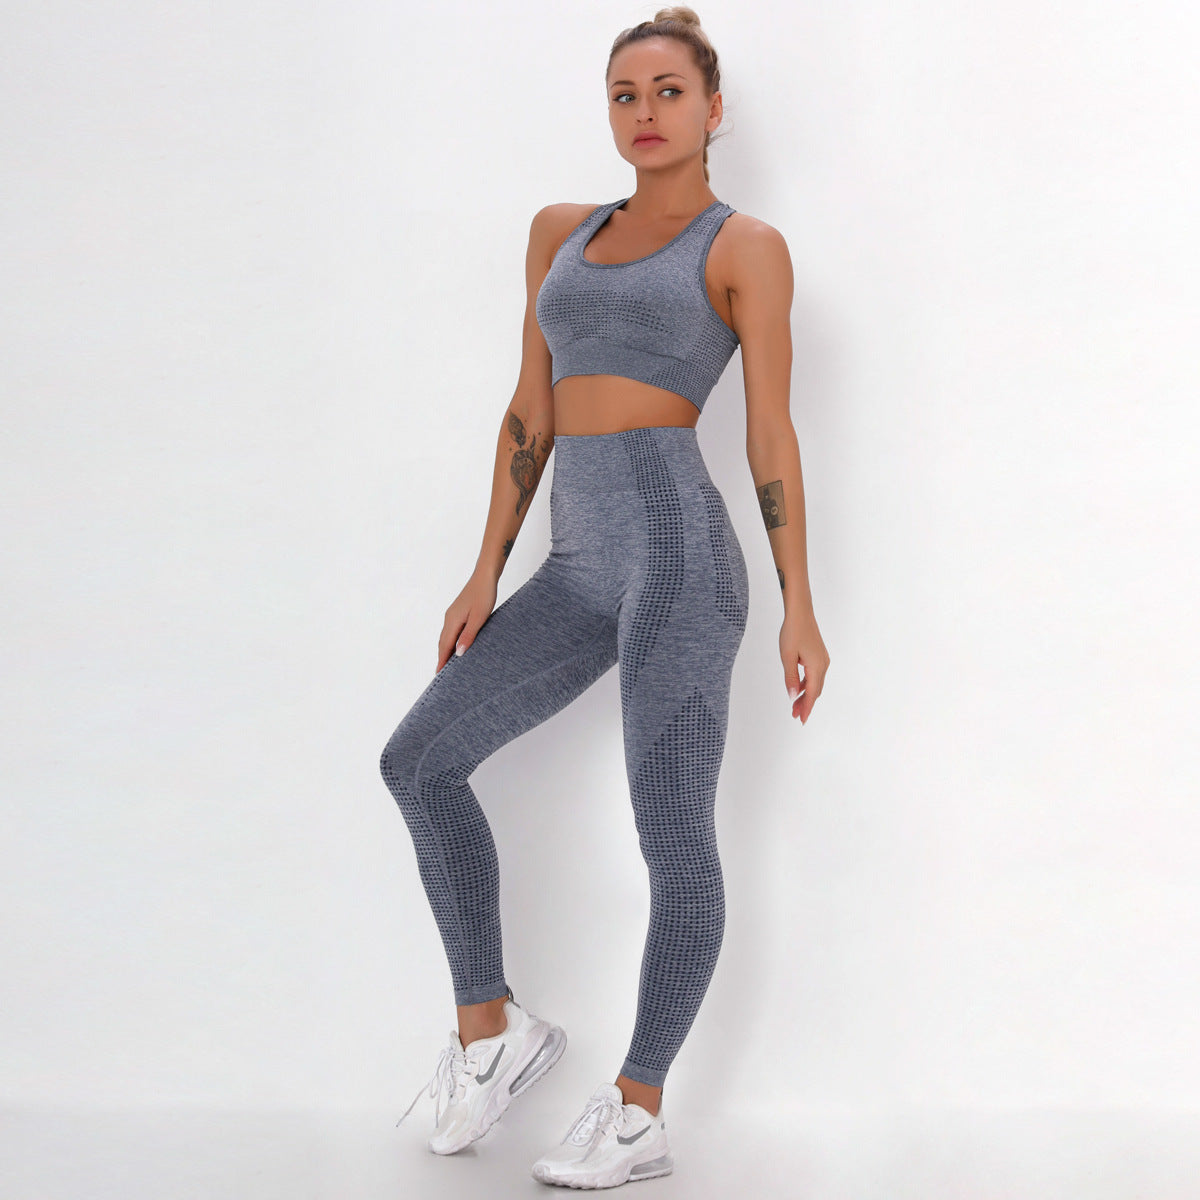 Seamless knitted yoga workout clothes - AllForU